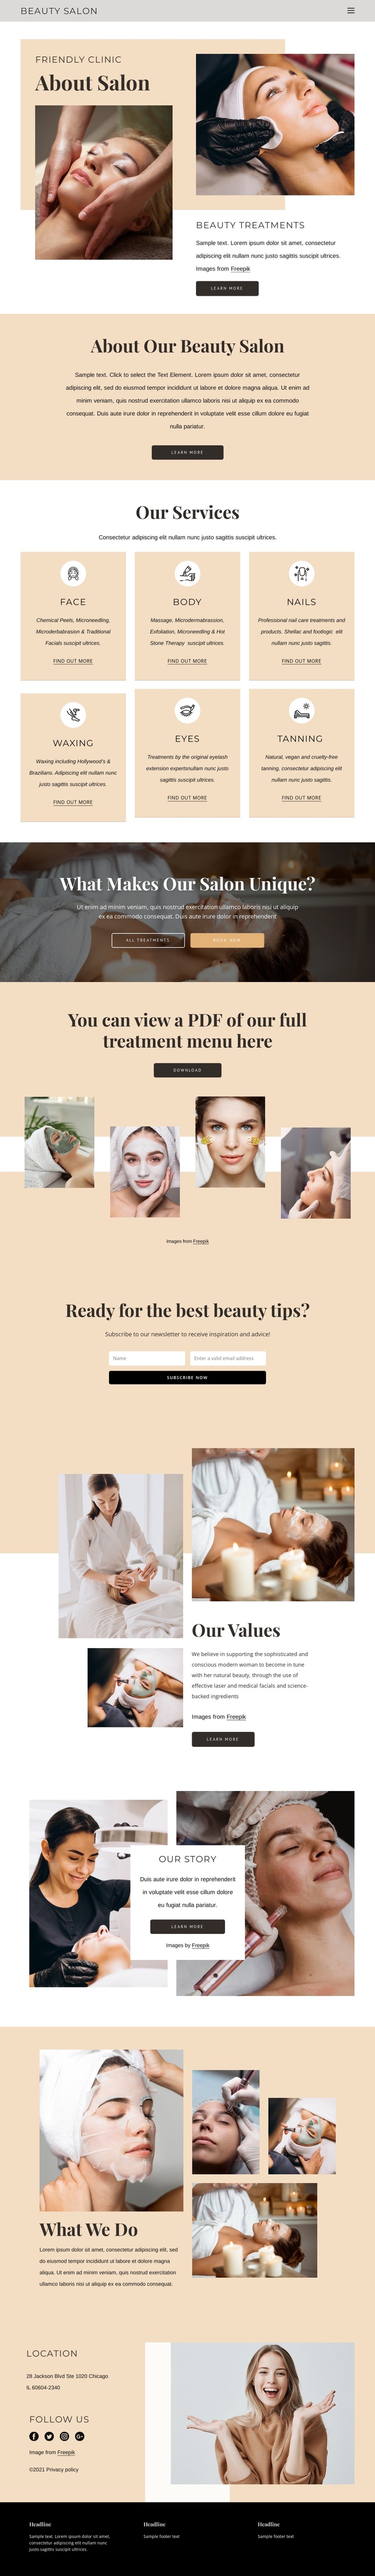 Beauty and aesthetic treatments Joomla Page Builder